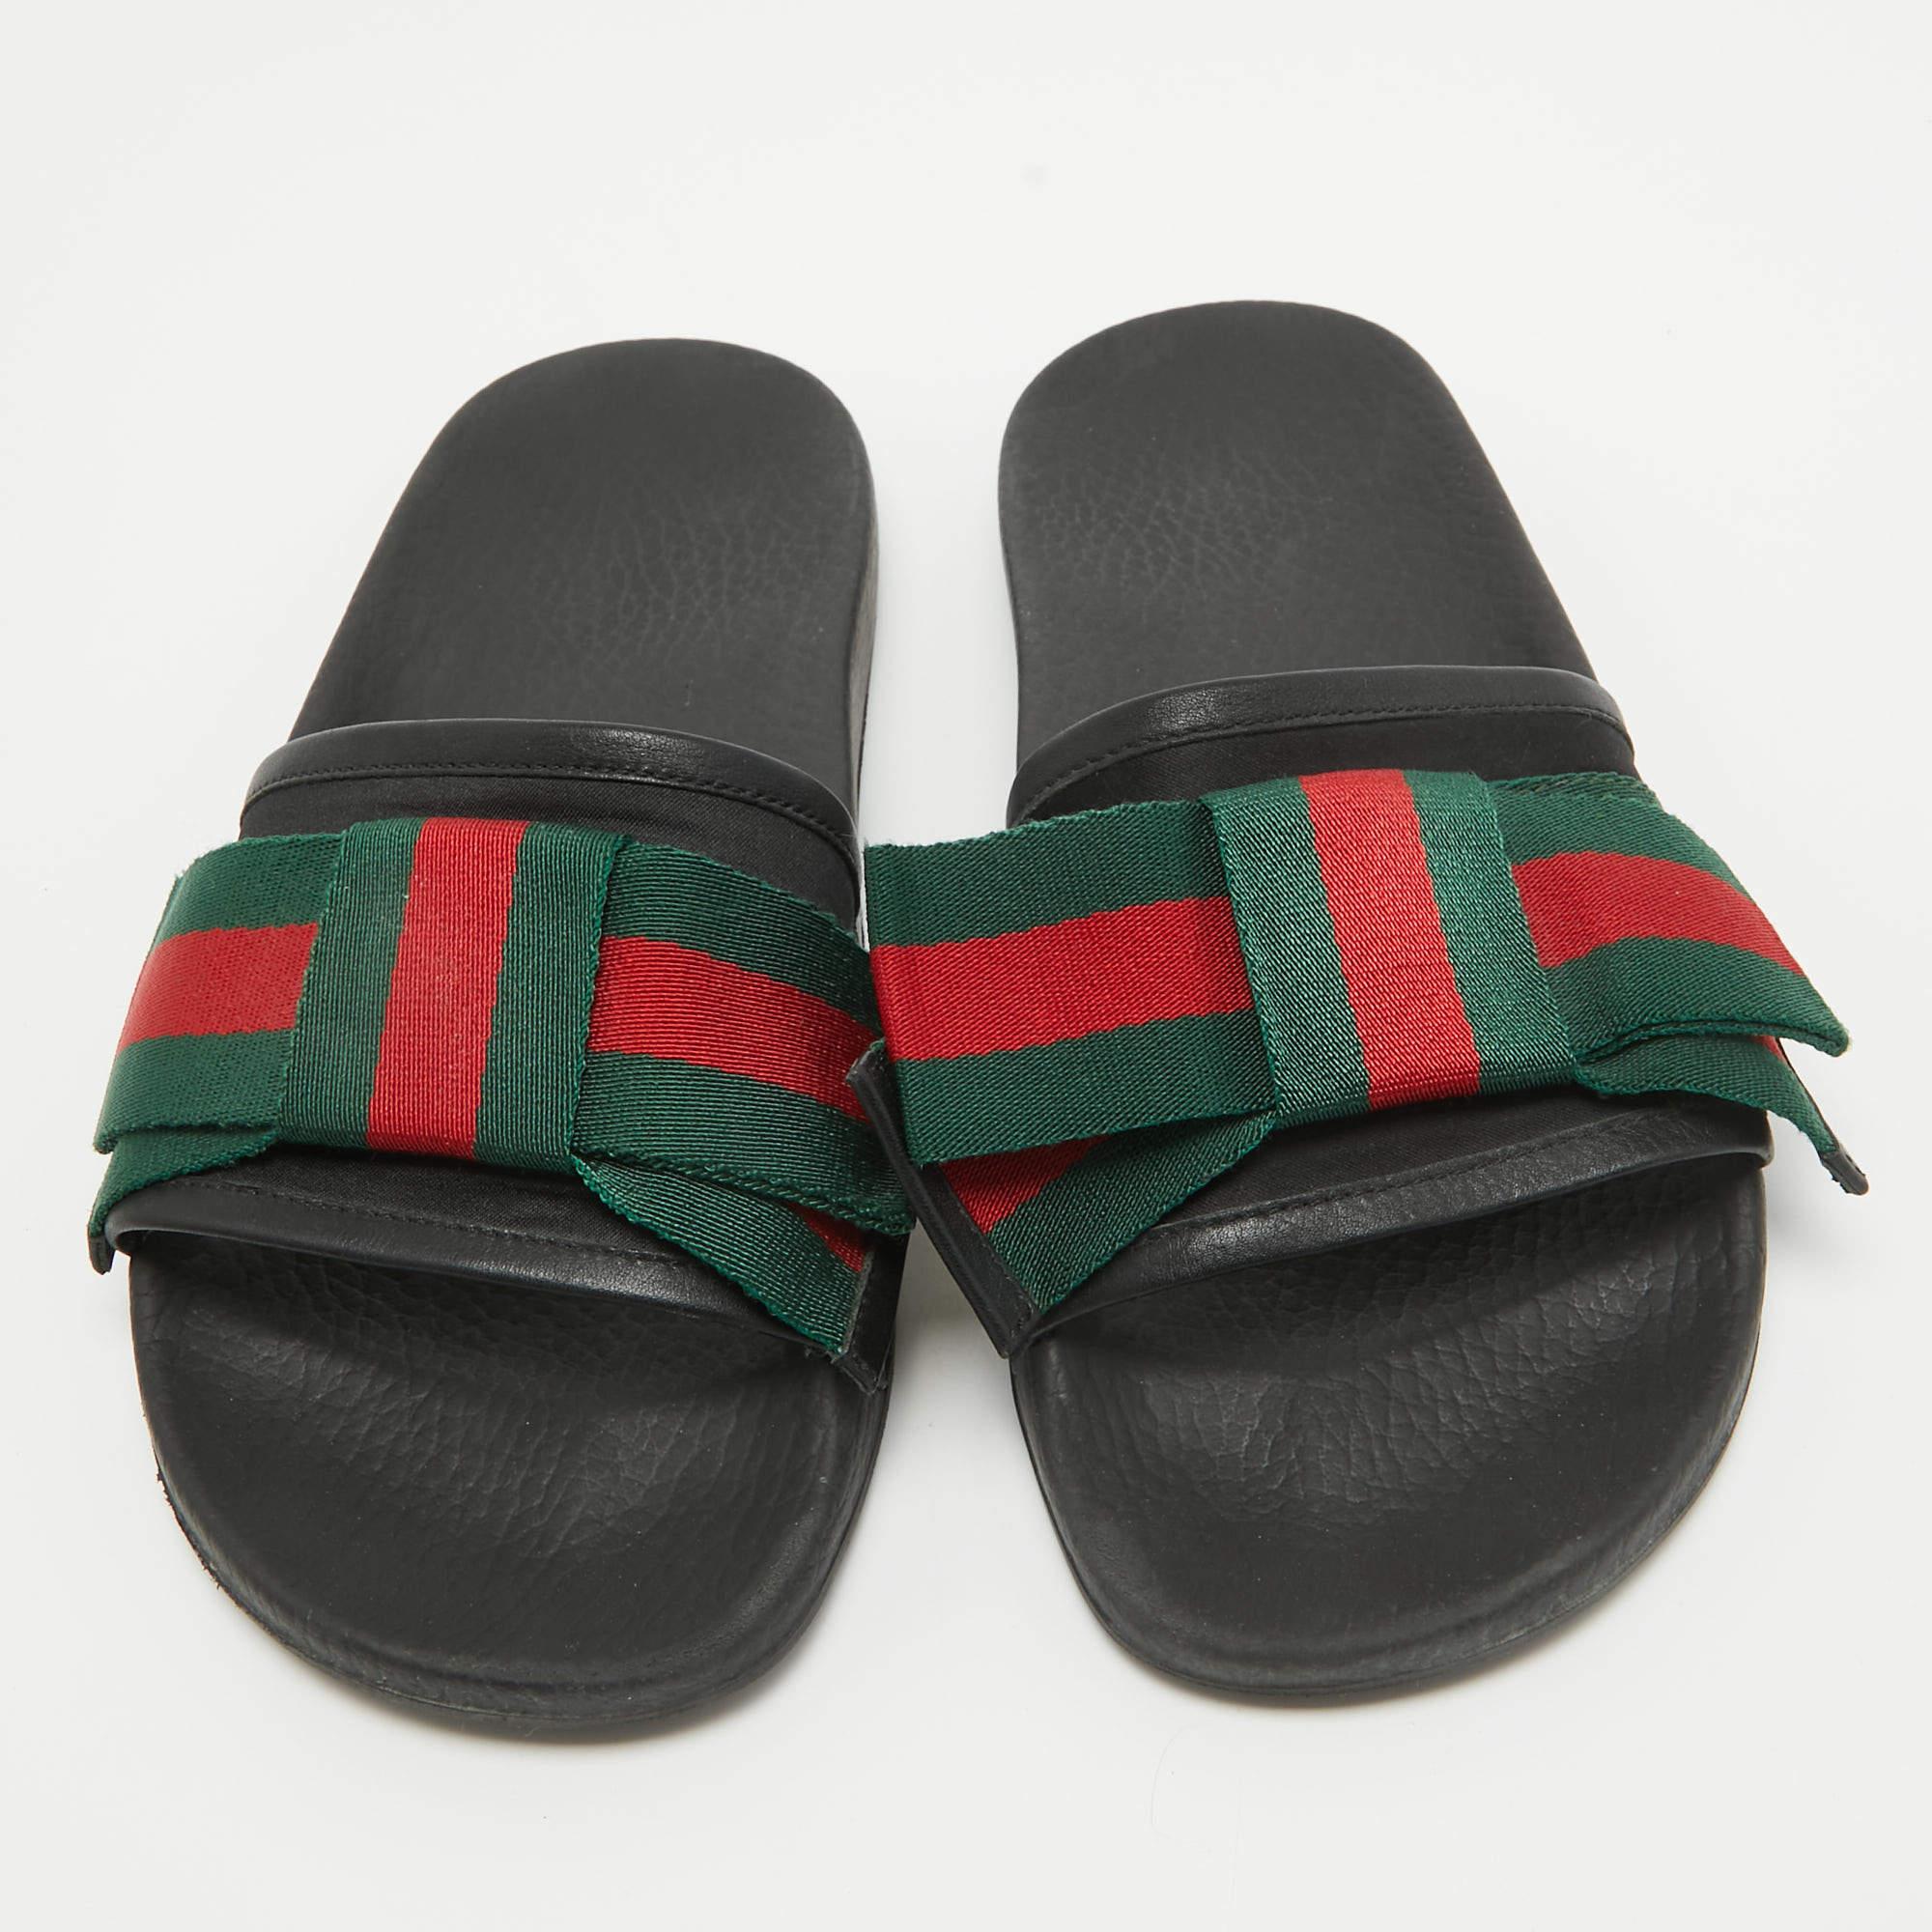 Gucci Tricolor Leather and Fabric Web Bow Pool Slides Size 37 In Good Condition For Sale In Dubai, Al Qouz 2